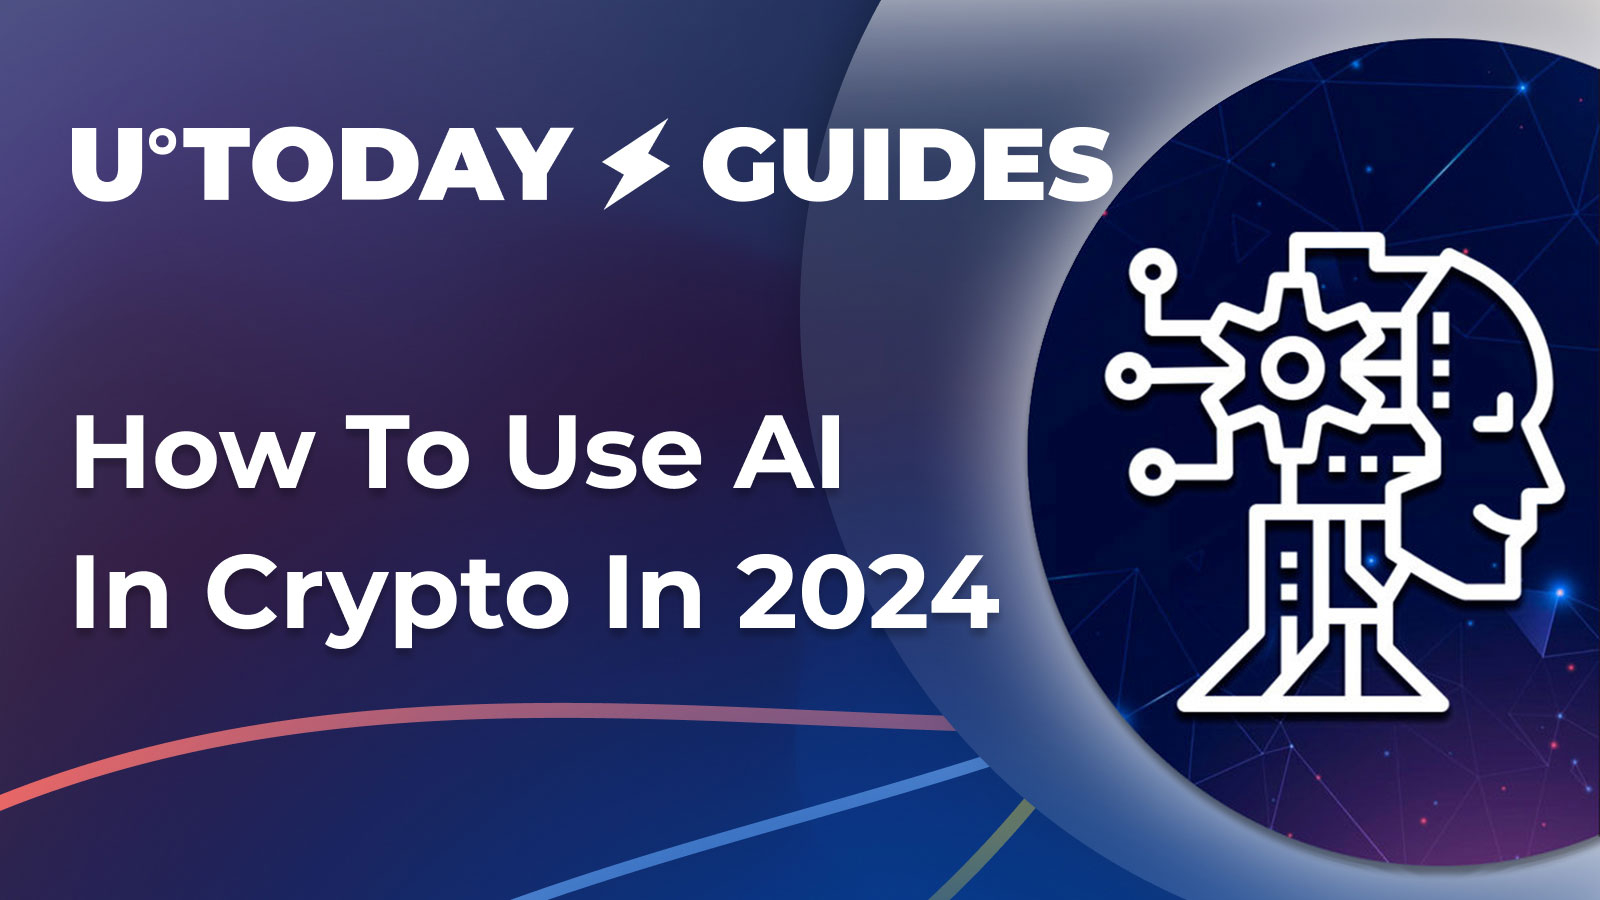 How to Use AI in Crypto in 2024